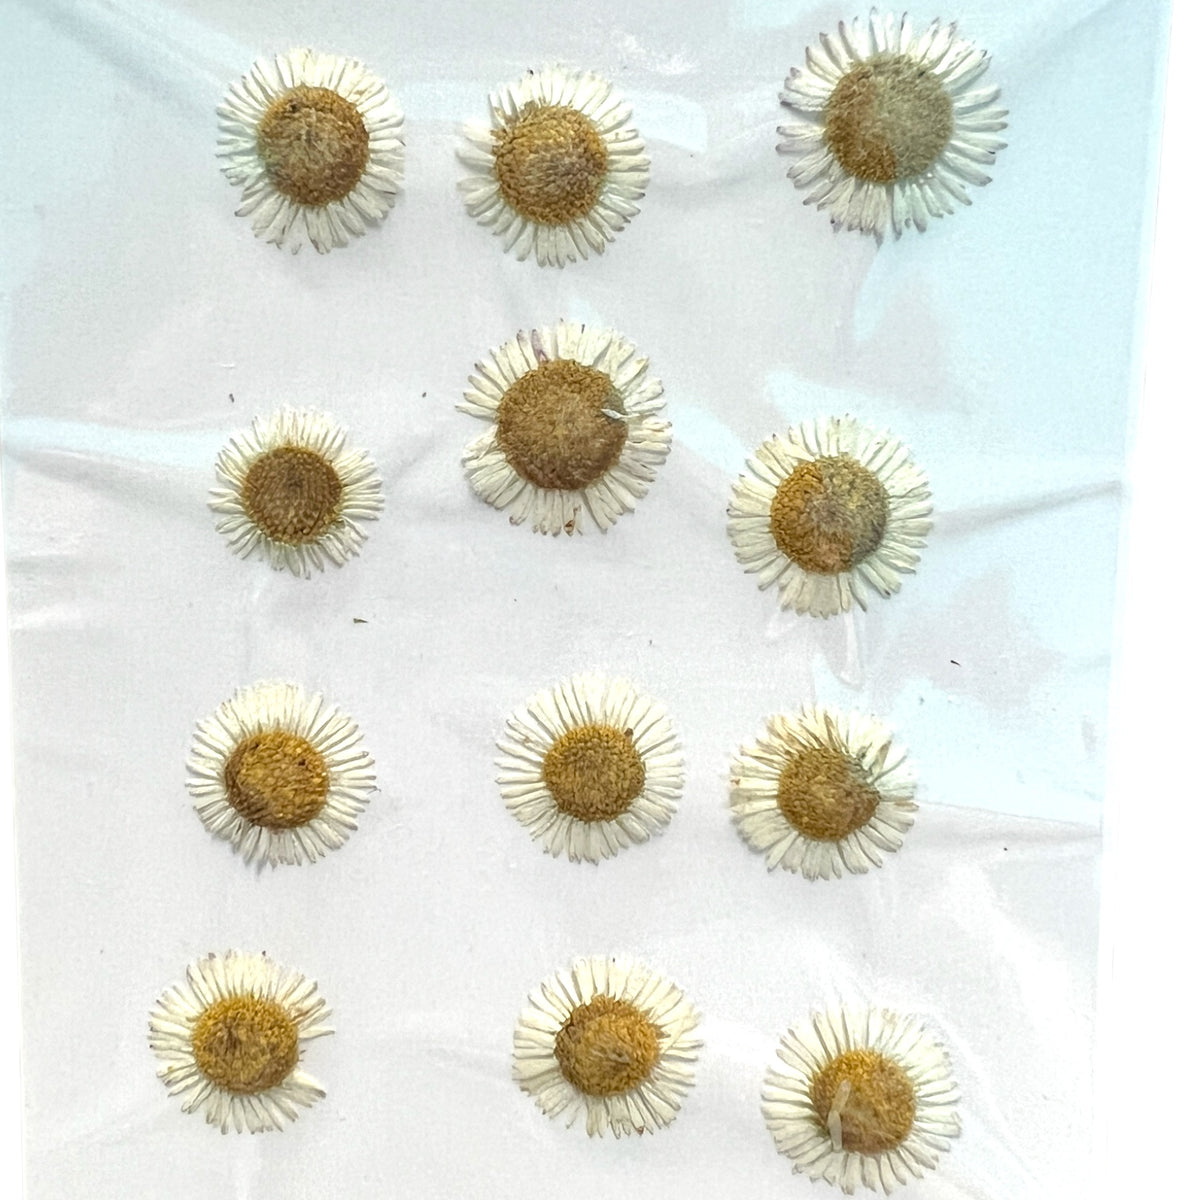 42PCS White Dried Daisy Flowers with Stem for Resin, Natural Real Pressed  Dry Daisy Flowers for Resin Jewelry DIY Phone Case Crafts Candle Making  Home